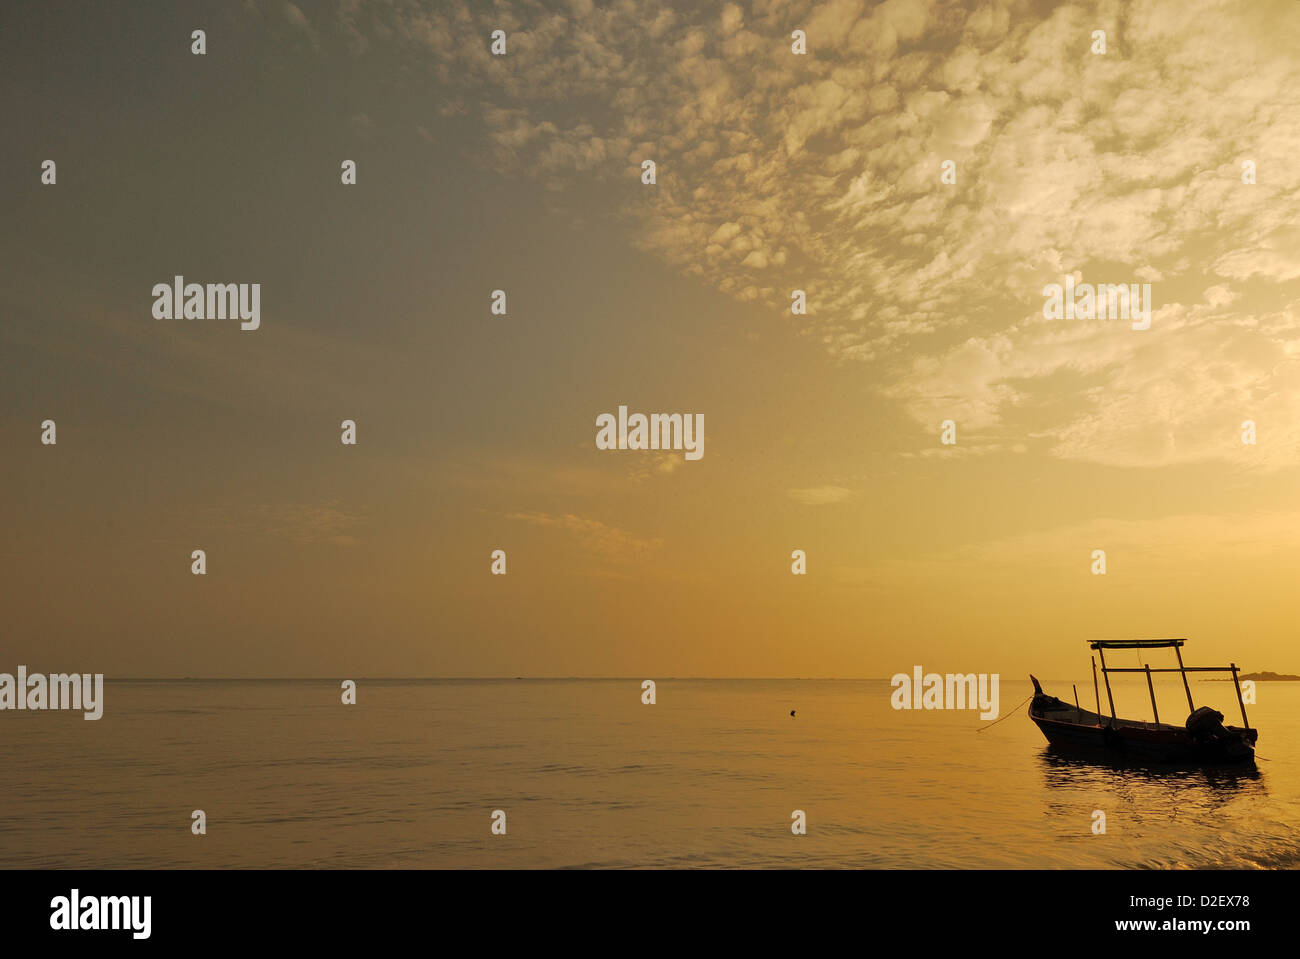 Lonely boat by the seaside during morning sunrise with golden color setting horizon, Penang, Malaysia. Stock Photo